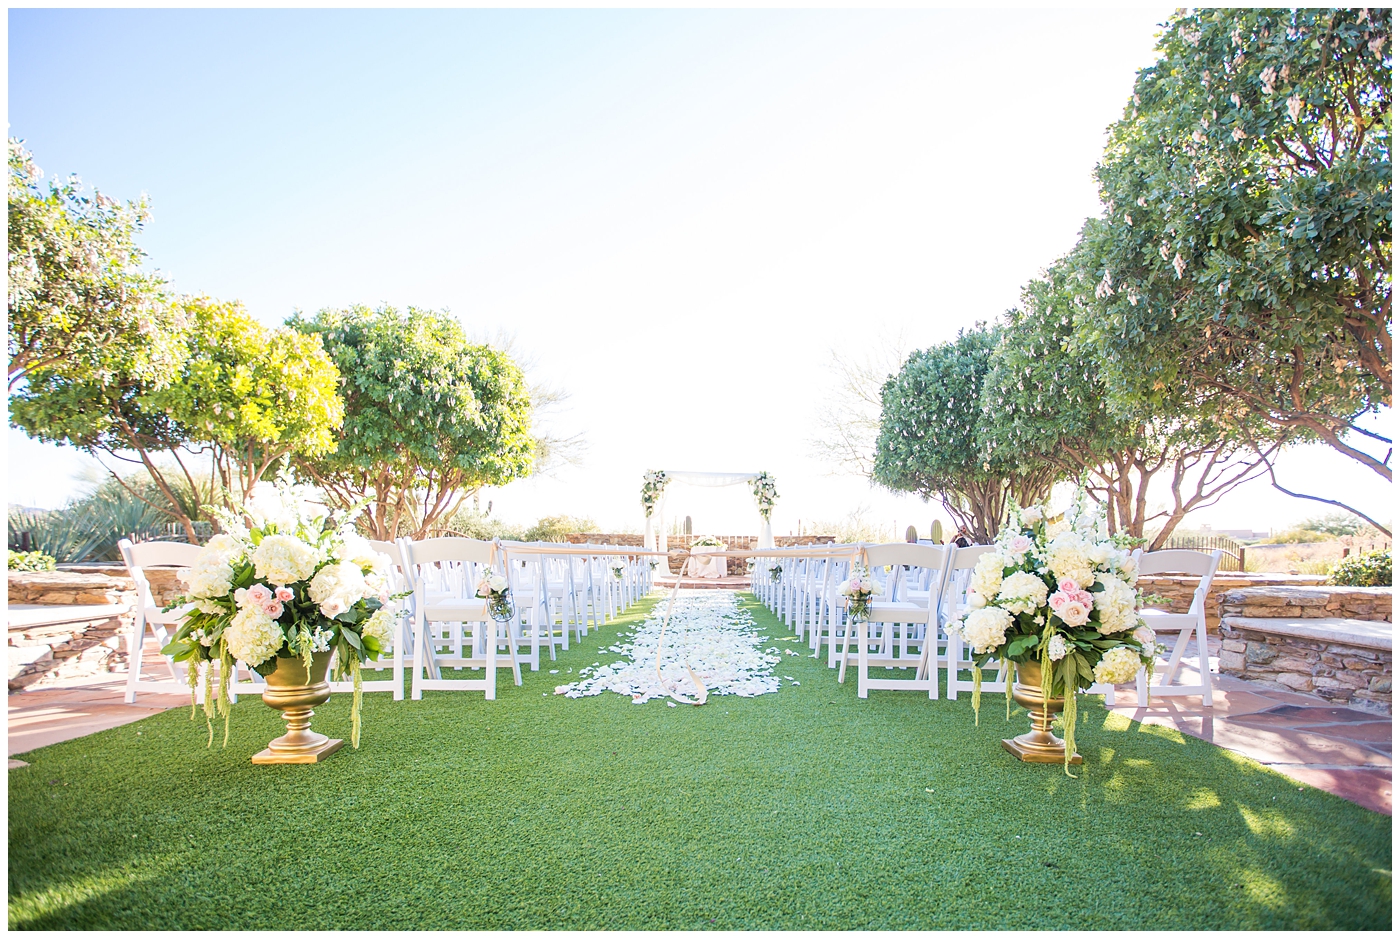 Sassi lawn ceremony site with rose petal aisle